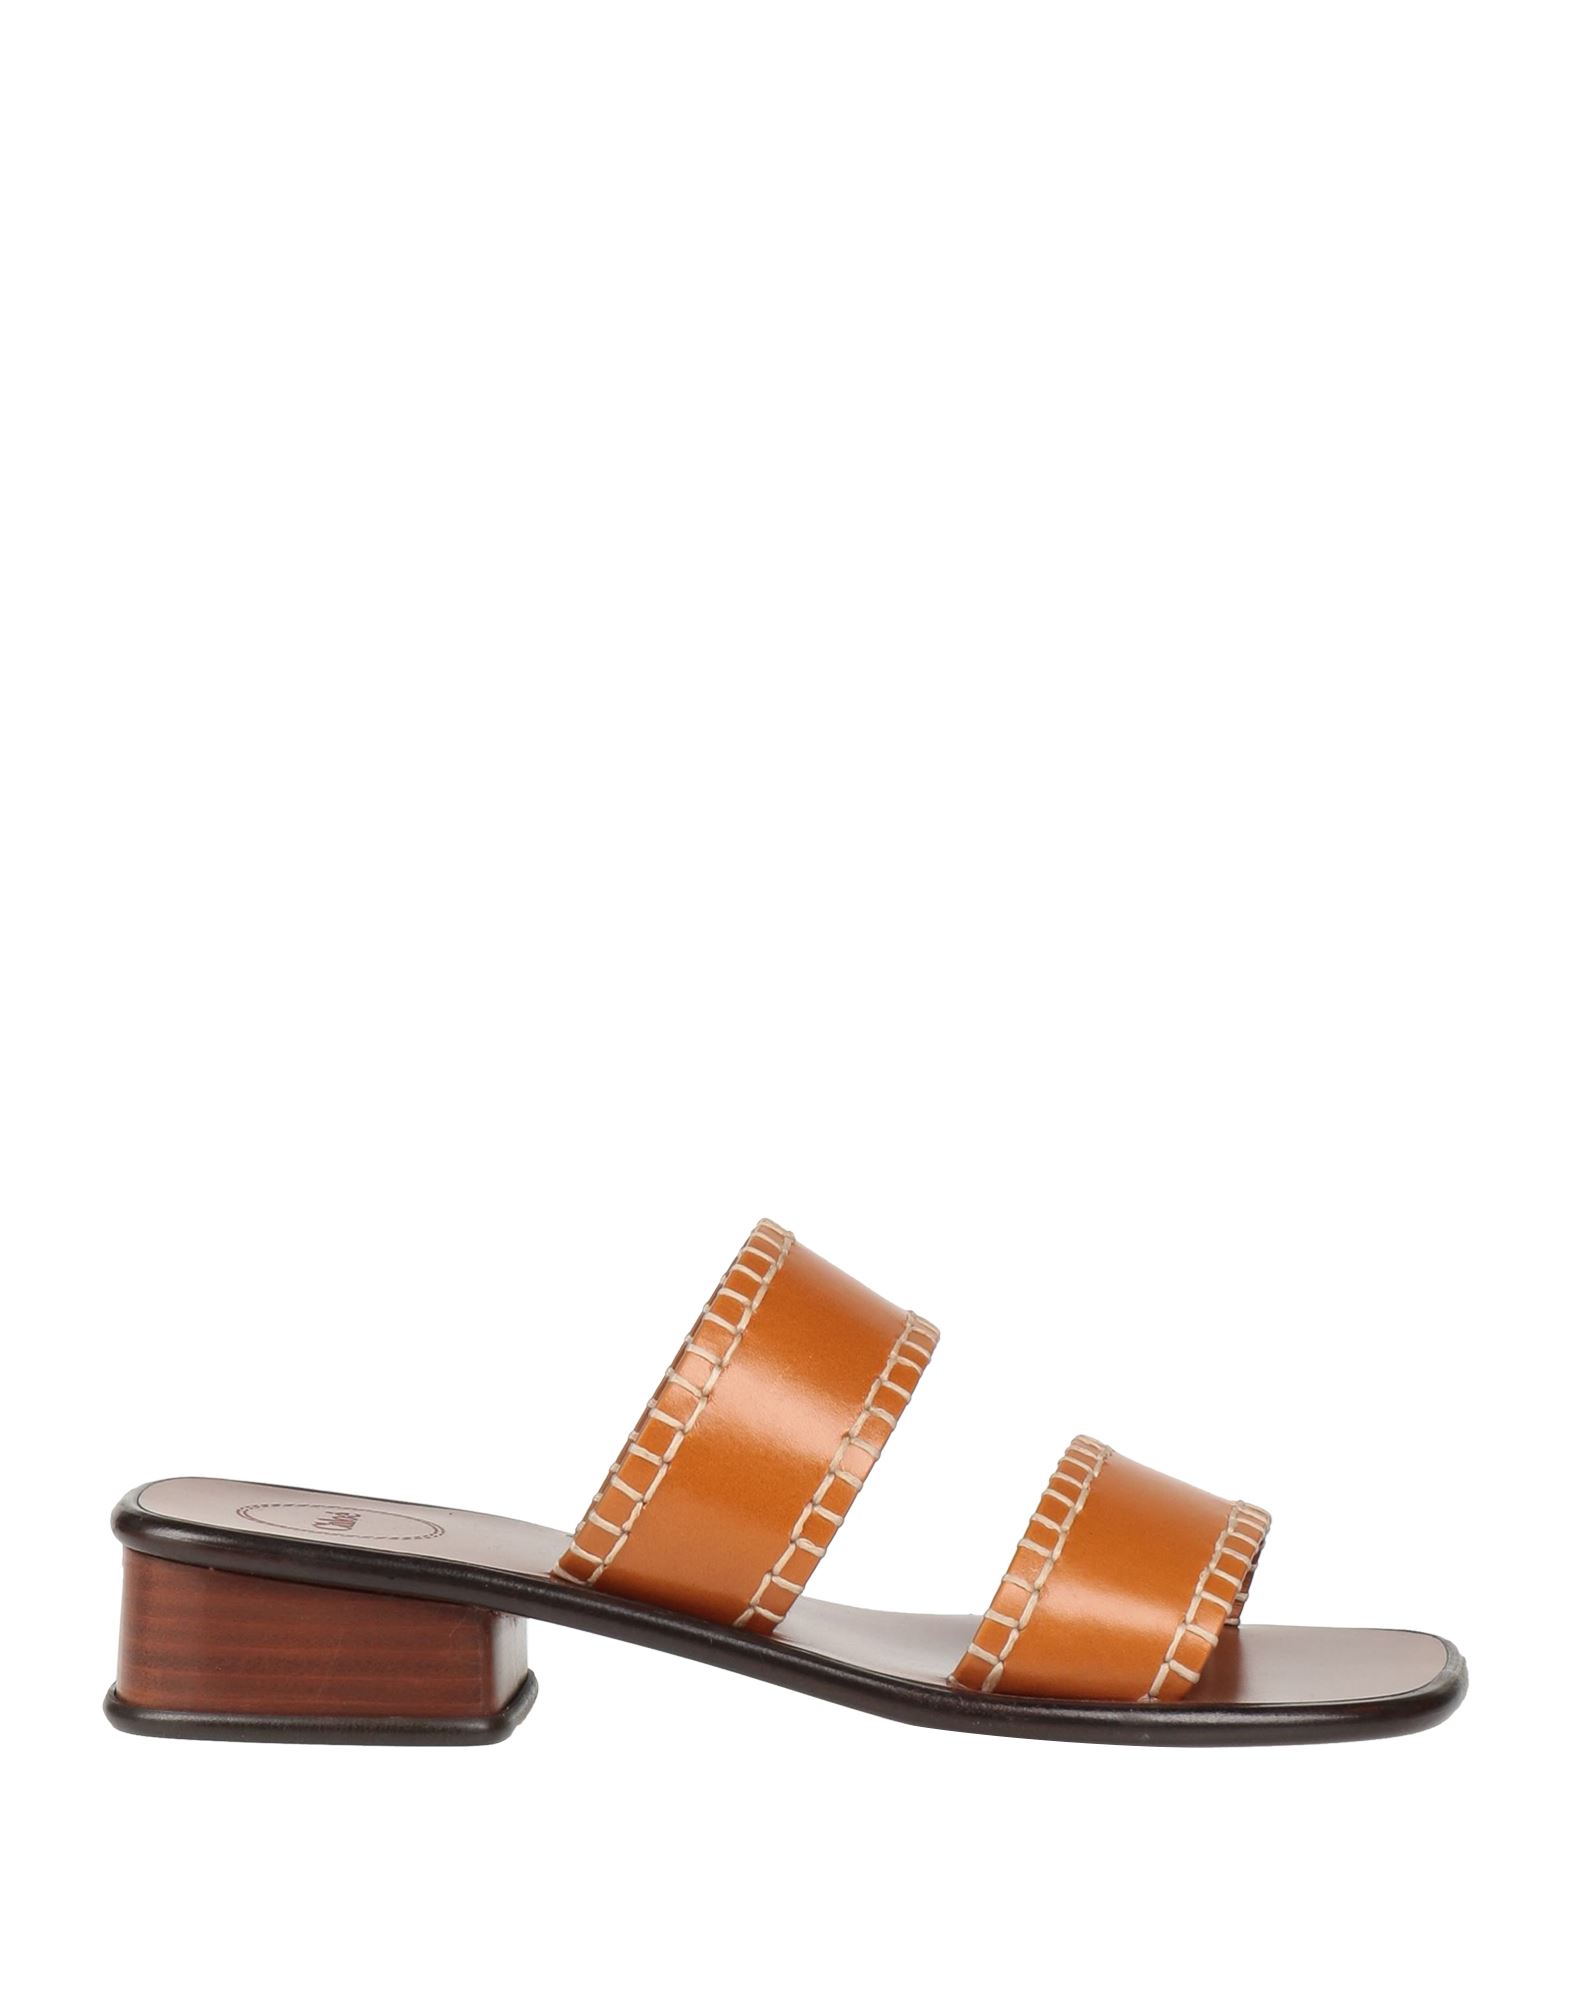 Chloé Woman Sandals Tan Size 6 Soft Leather In Brown